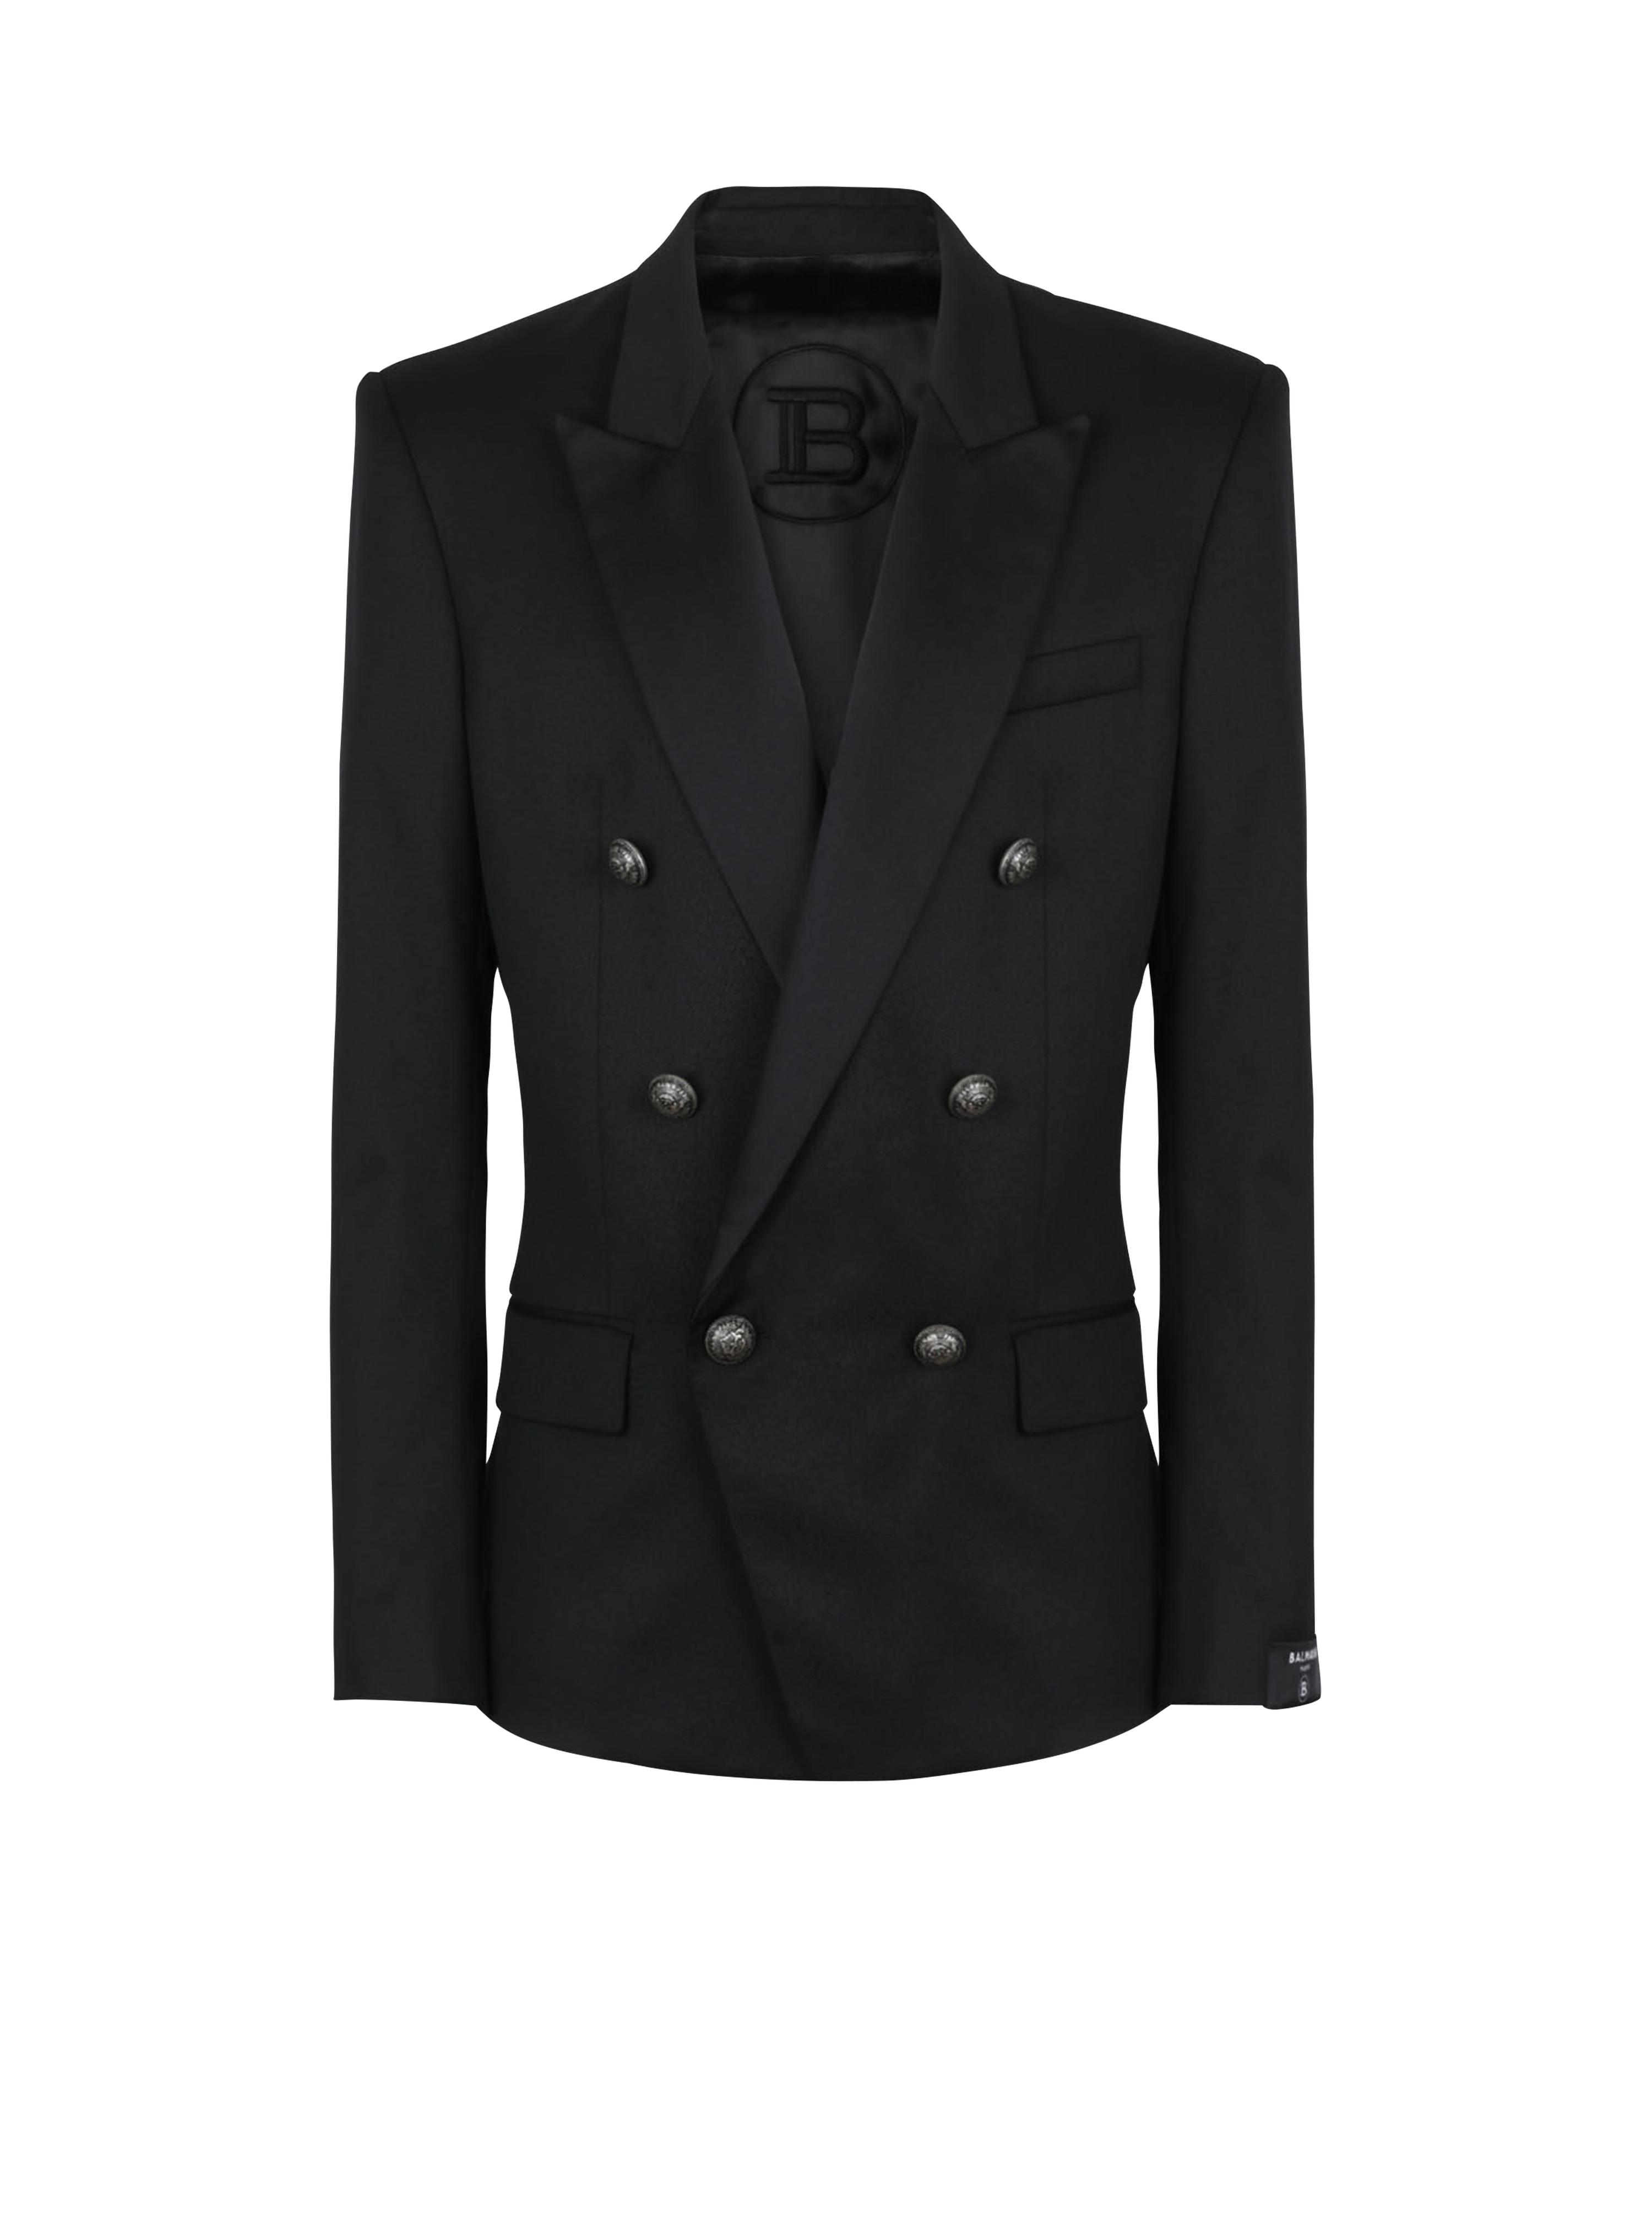 Wool blazer with double-breasted silver-tone buttoned fastening, black